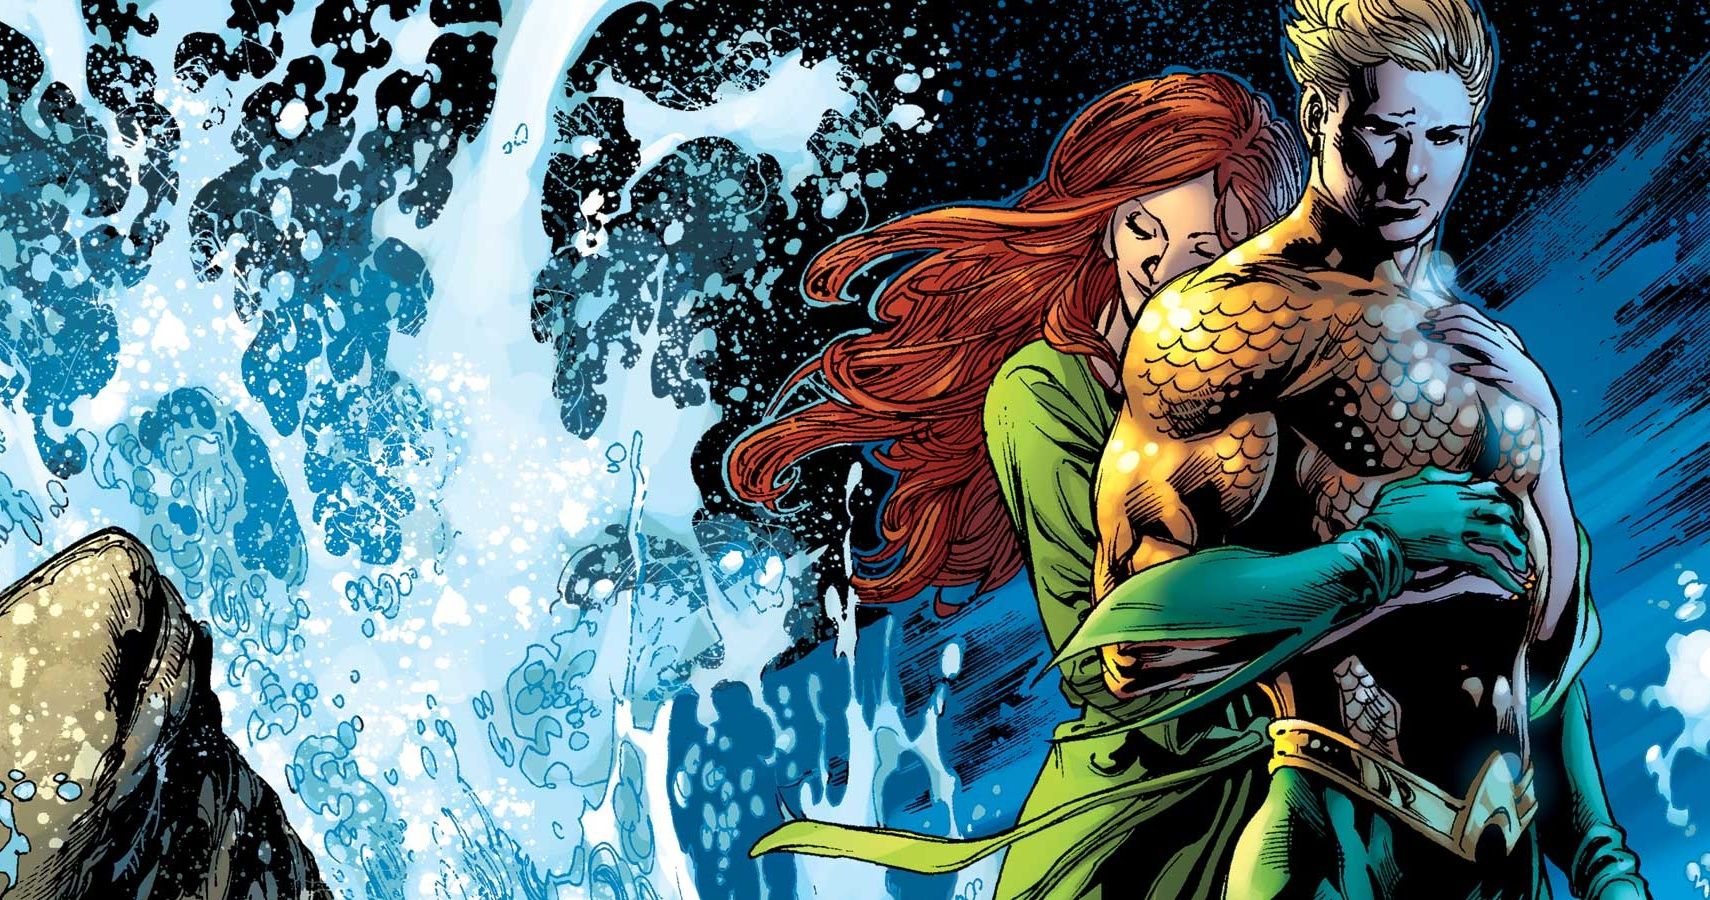 Mera wraps her arms around Aquaman, while a wave splashes in the background